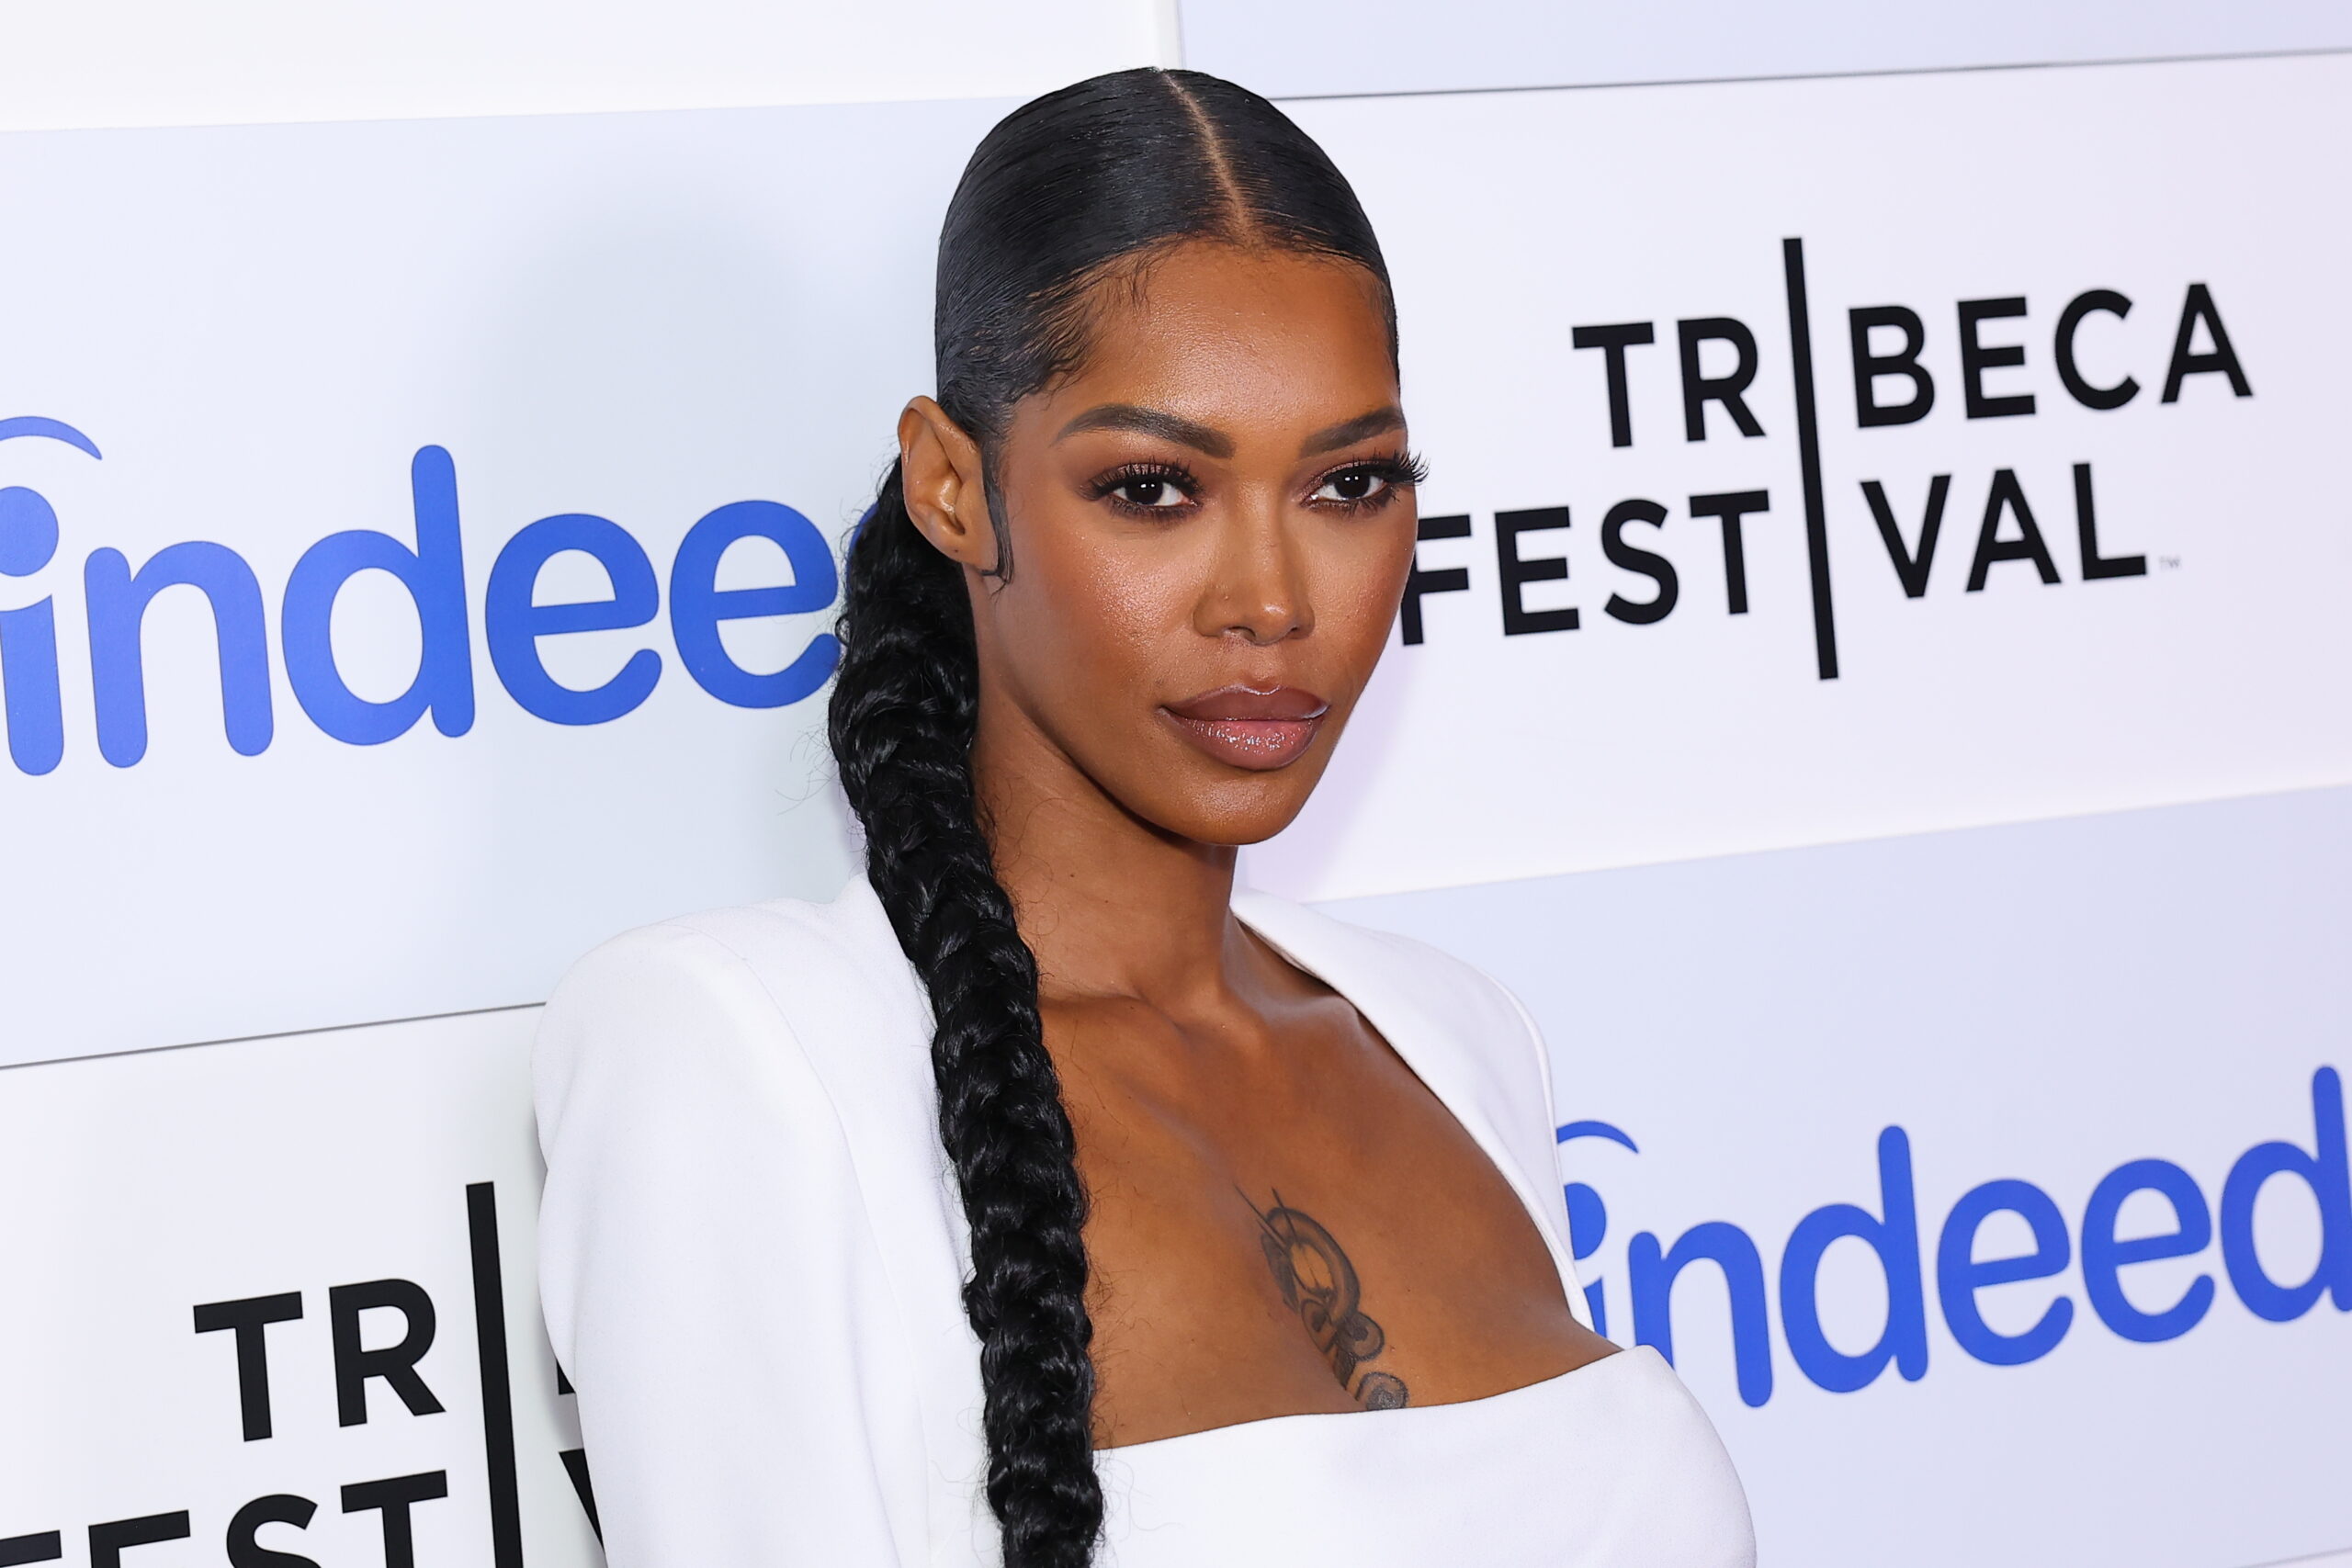 Who Is Jessica White? The Newsest Member Of "Love & Hip Hop"